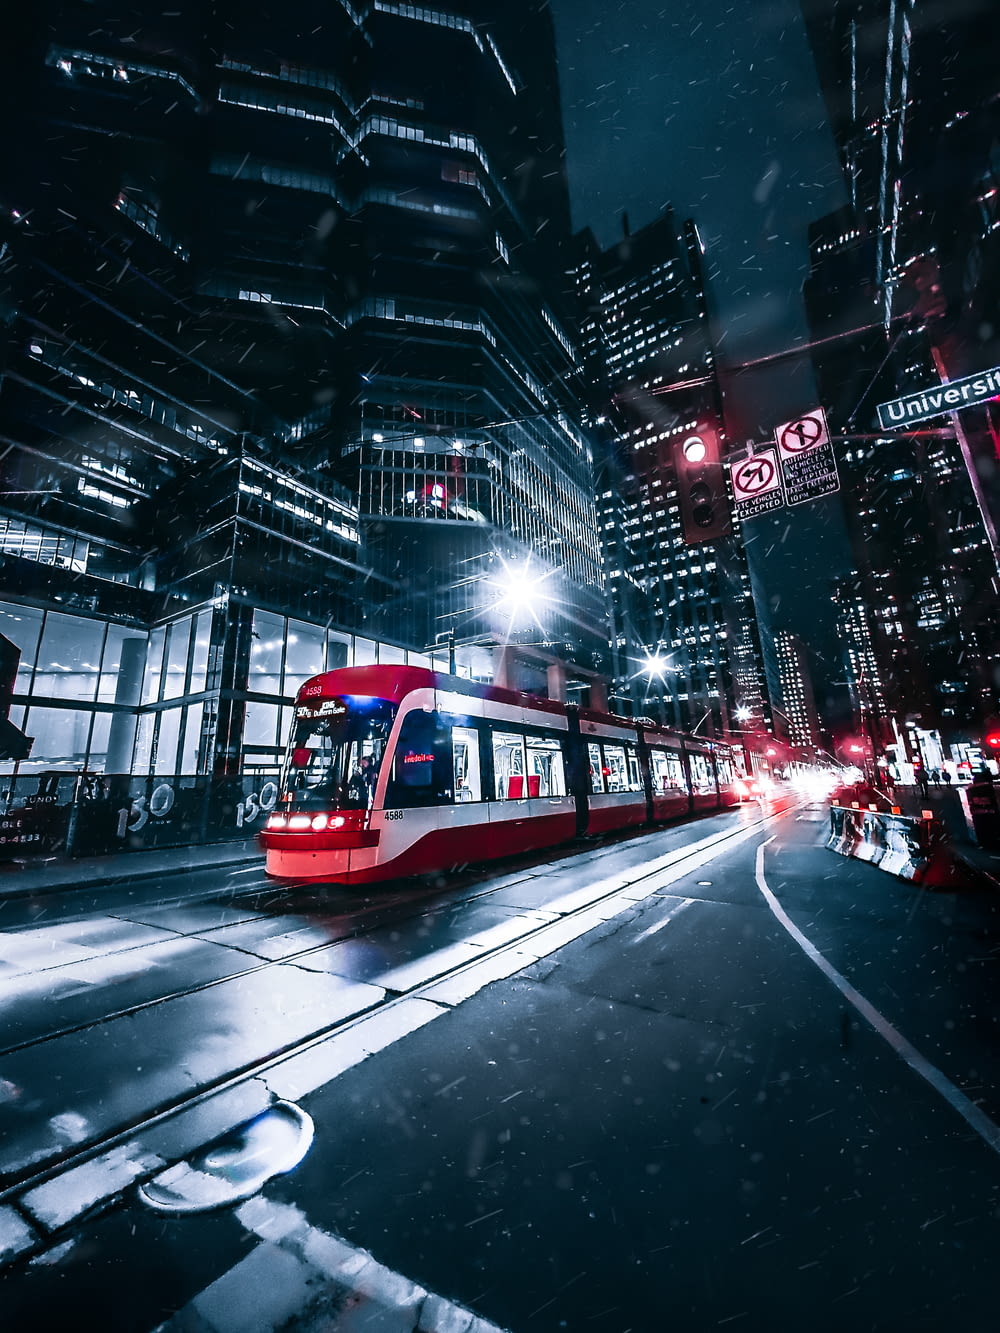 a red and white train traveling through a city at night